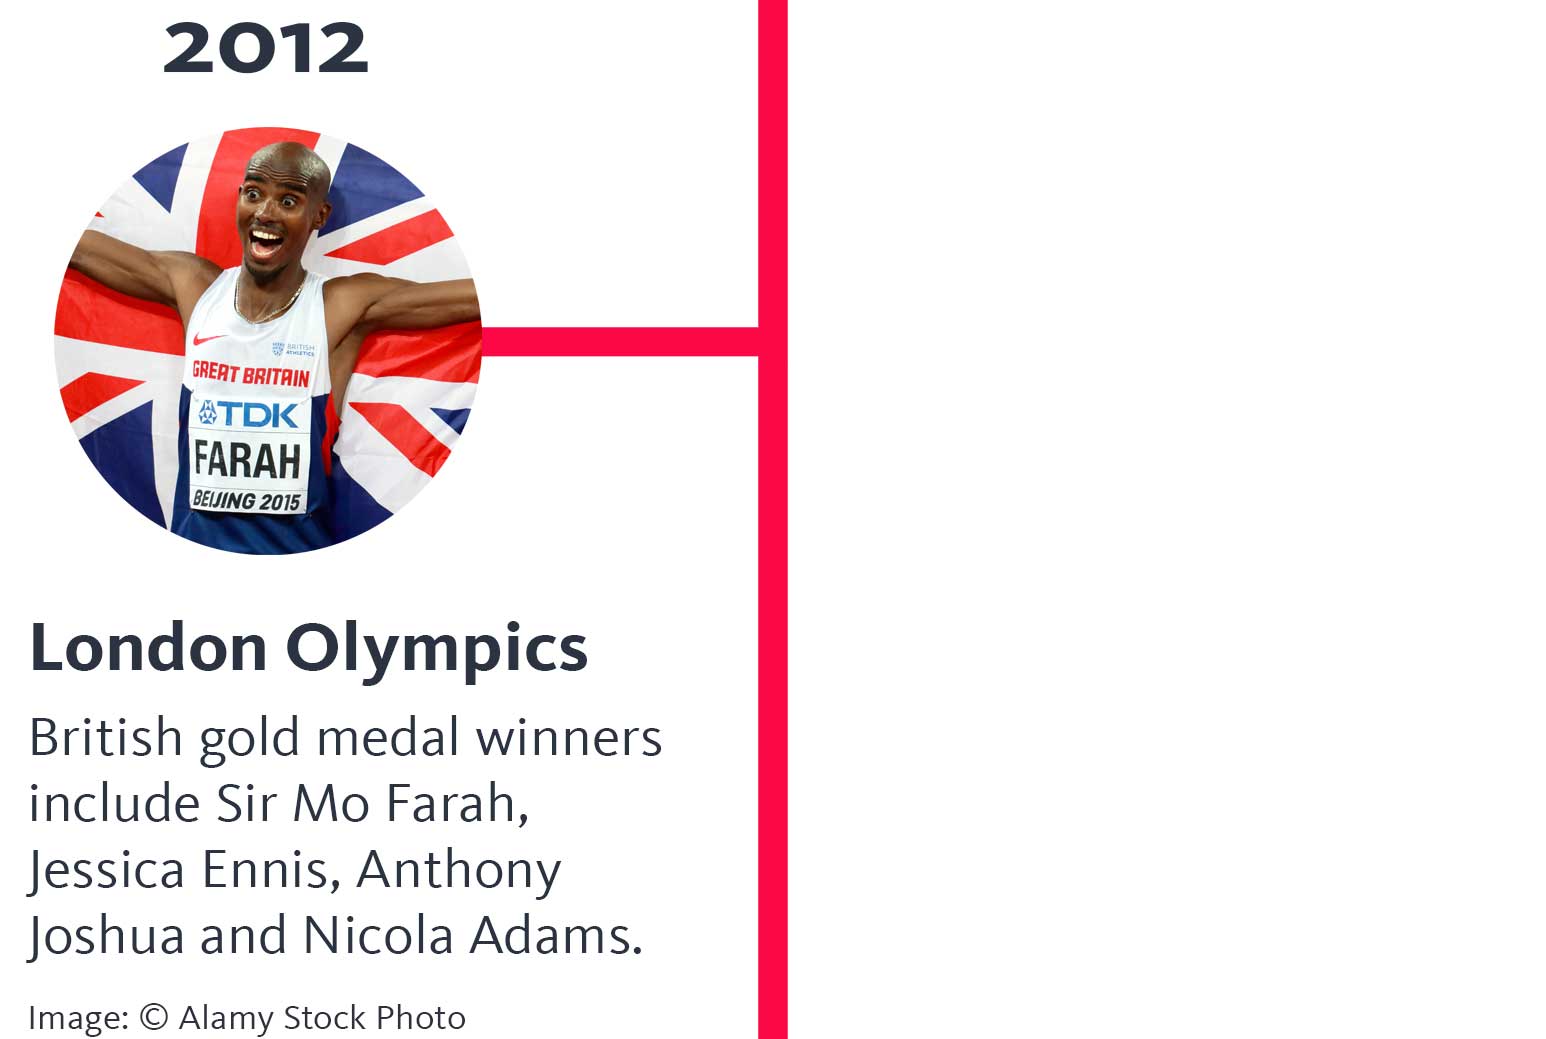 The year '2012' appears above a photograph of Mo Farah smiling in running gear with a Union Flag draped over his back. A heading below says 'London Olympics', and text below that says 'British gold medal winners include Sir Mo Farah, Jessica Ennis, Anthony Joshua and Nicola Adams.' and below that, 'Image: © Alamy Stock Photo'.